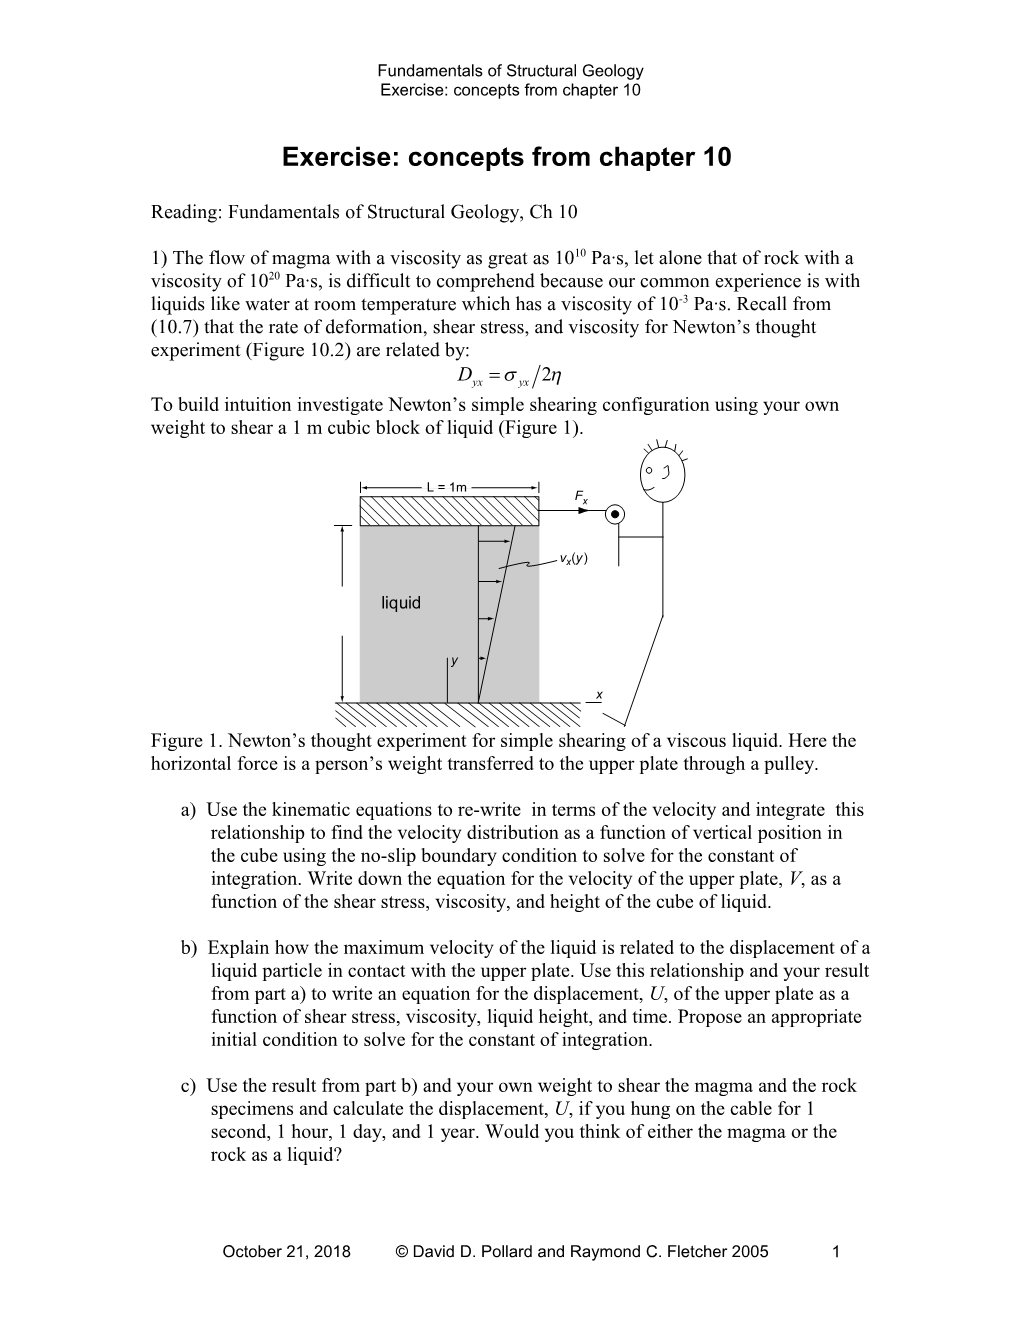 Exercise: Concepts from Chapter 10